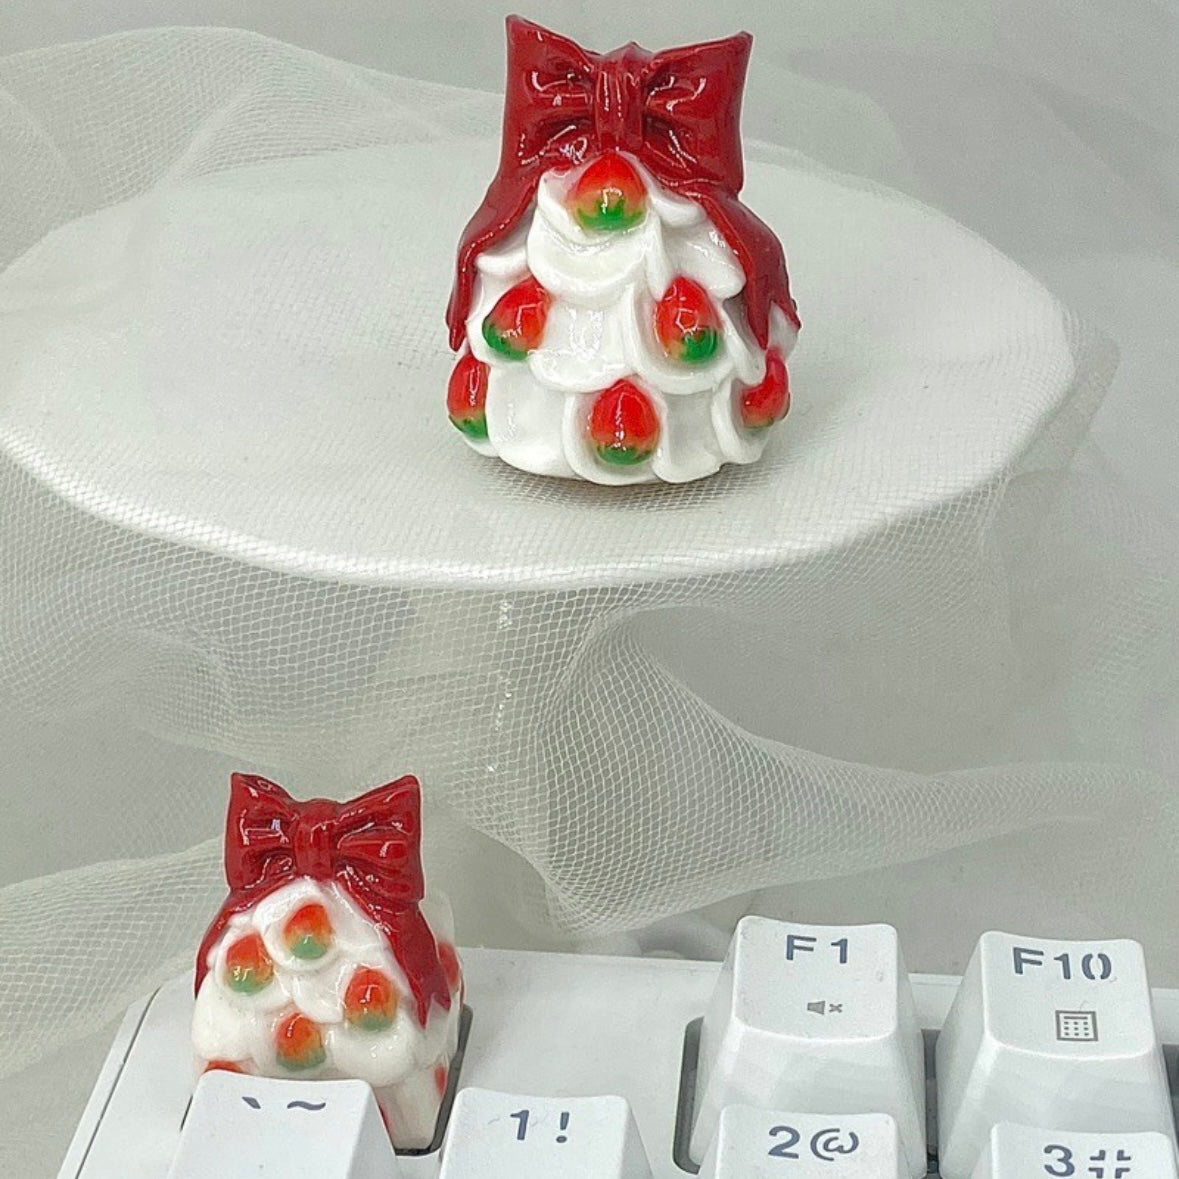 "Get into the holiday spirit with our 'Strawberry Christmas Tree Gift' Custom Artisan Keycaps. Handcrafted with care, these keycaps feature a whimsical design of a strawberry Christmas tree gift, adding a touch of festive cheer to your keyboard. They make for a delightful gift for yourself or fellow enthusiasts. Elevate your keyboard setup with these unique and charming artisan keycaps." 🍓🎄🎁 #Keycaps #ArtisanKeycaps #ChristmasCheer